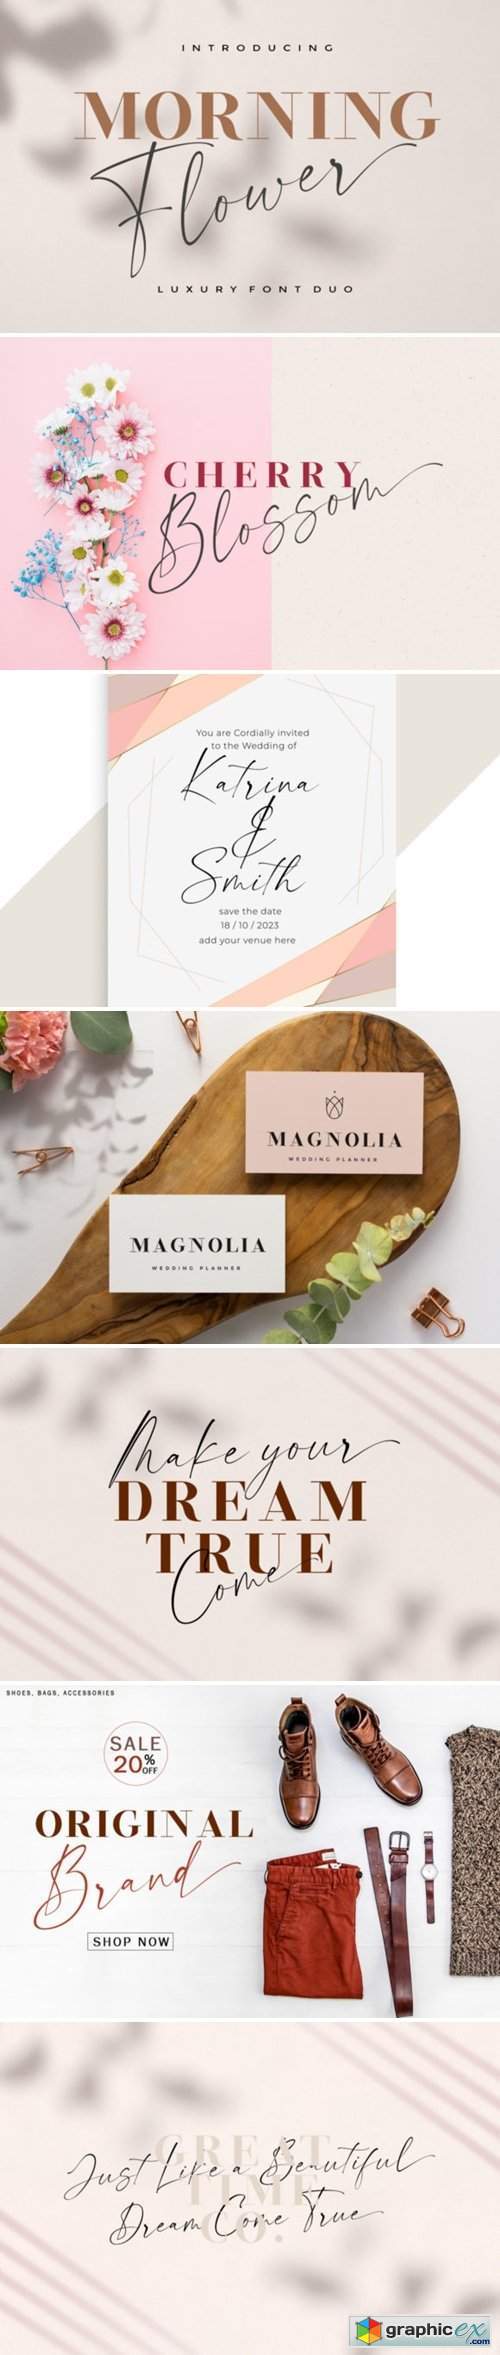 Morning Flower Duo Font